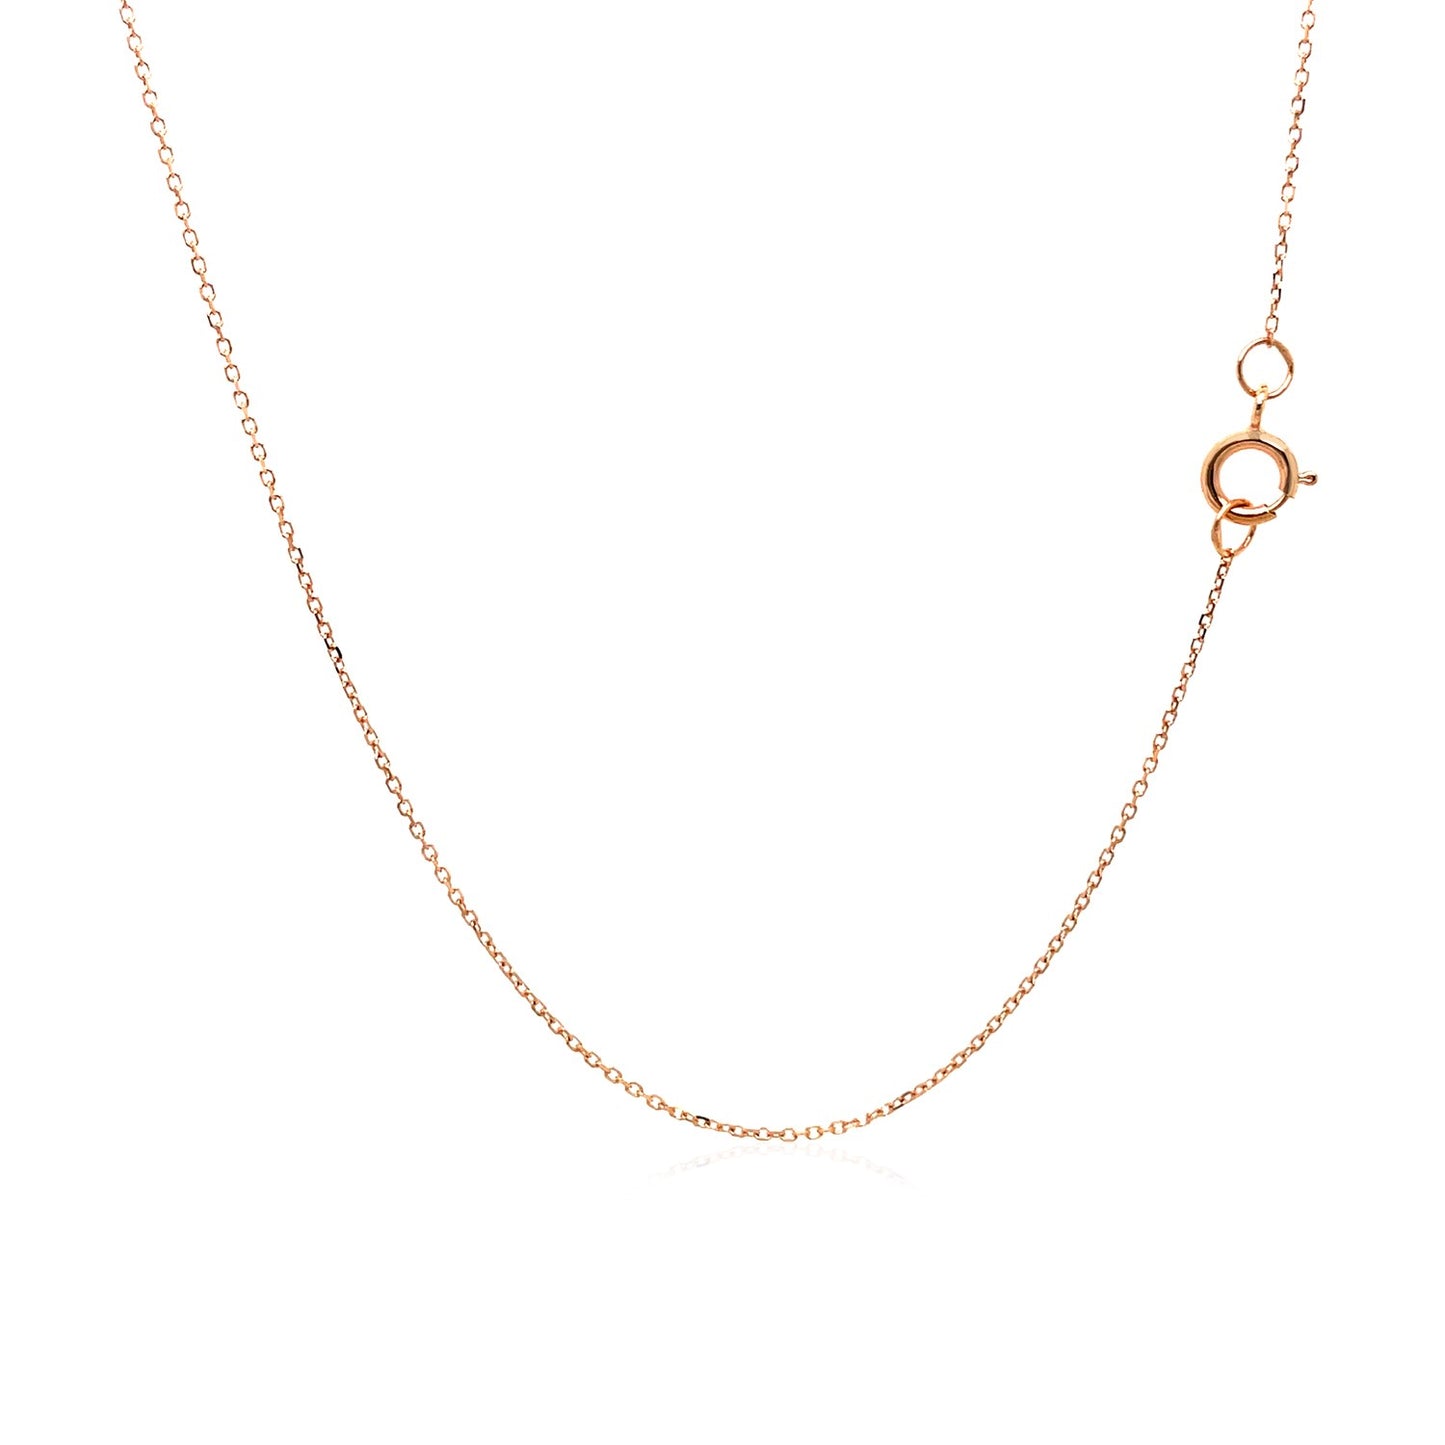 14k Rose Gold Diamond Cut Cable Link Chain 0.7mm